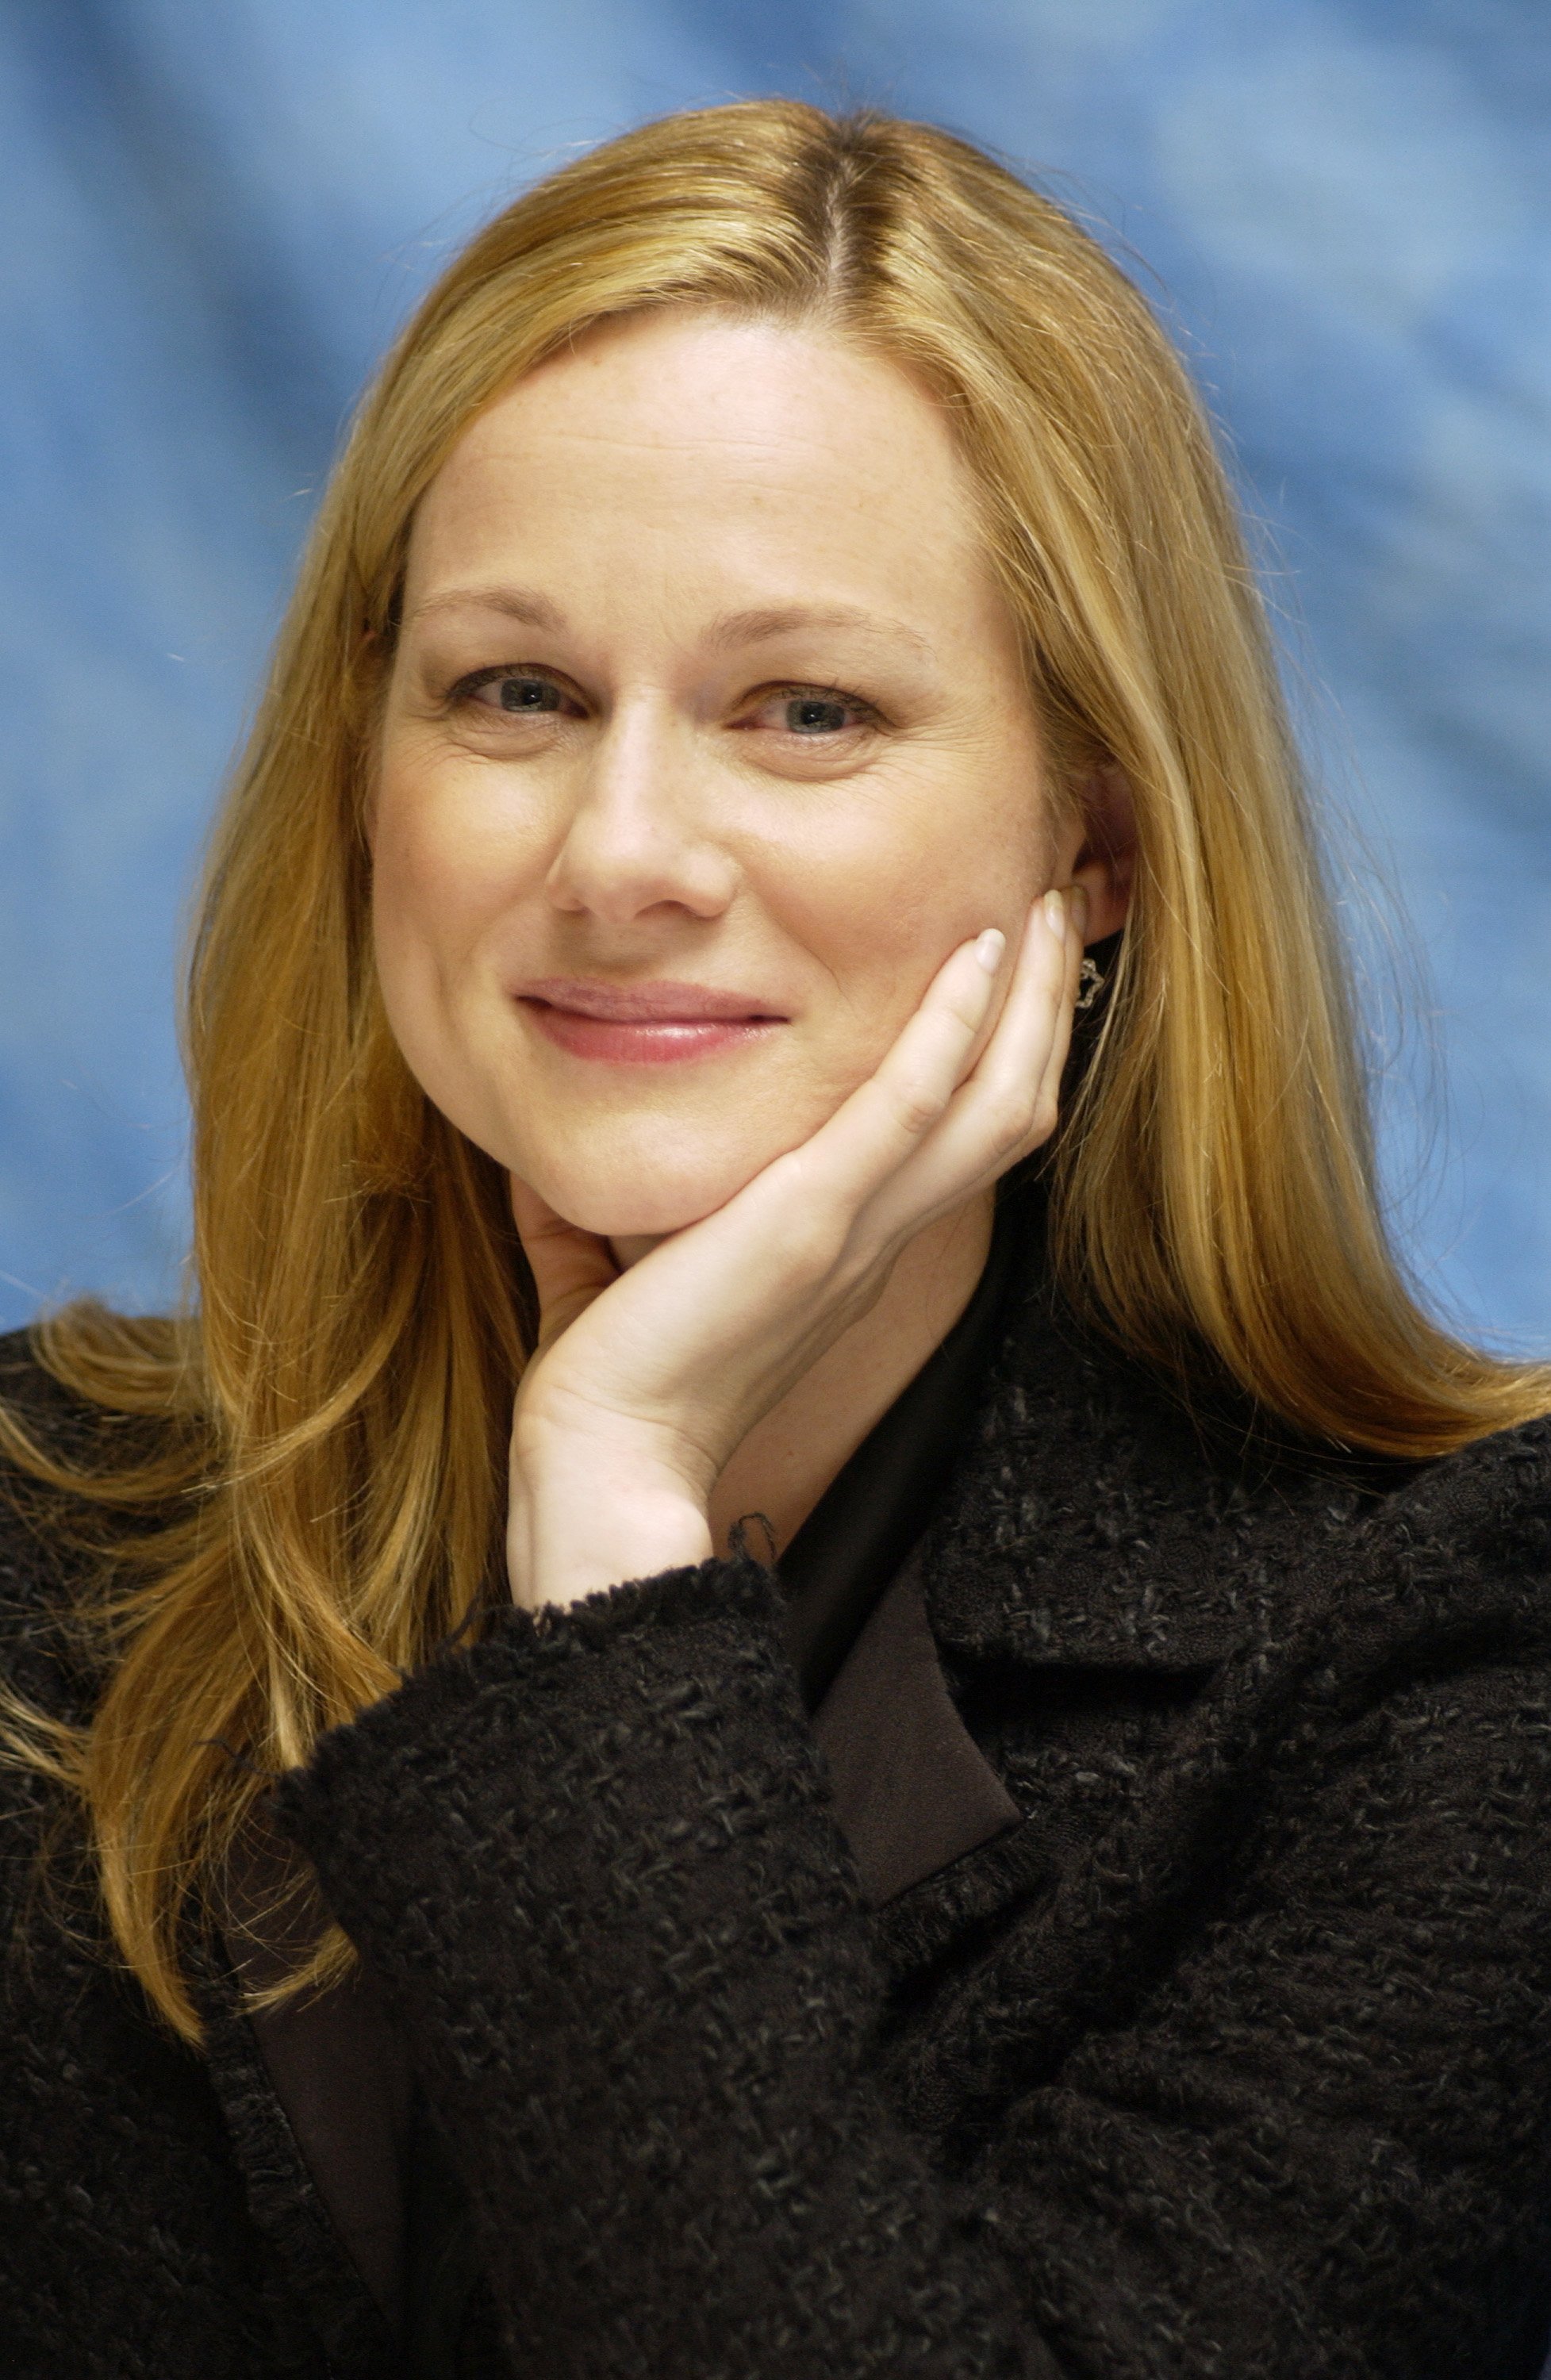 Actress Laura Linney during "Love, Actually" press conference at Dorchester Hotel in London, Great Britain. / Source: Getty Images